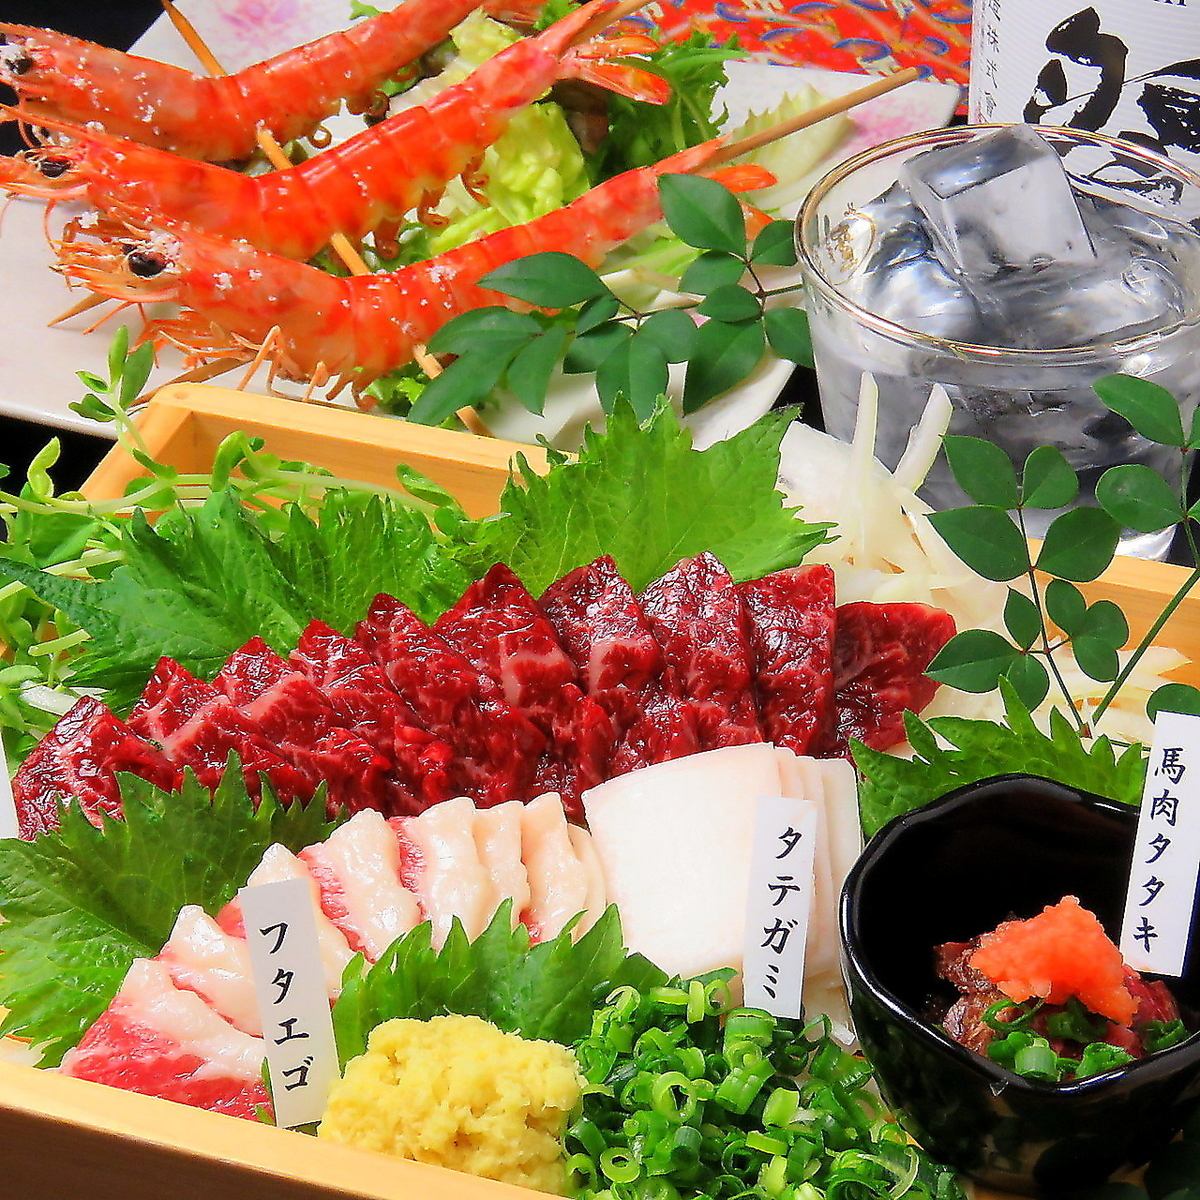 Open from noon! Local Kumamoto cuisine "horse sashimi" and "fresh fish delivered directly from the market" available♪